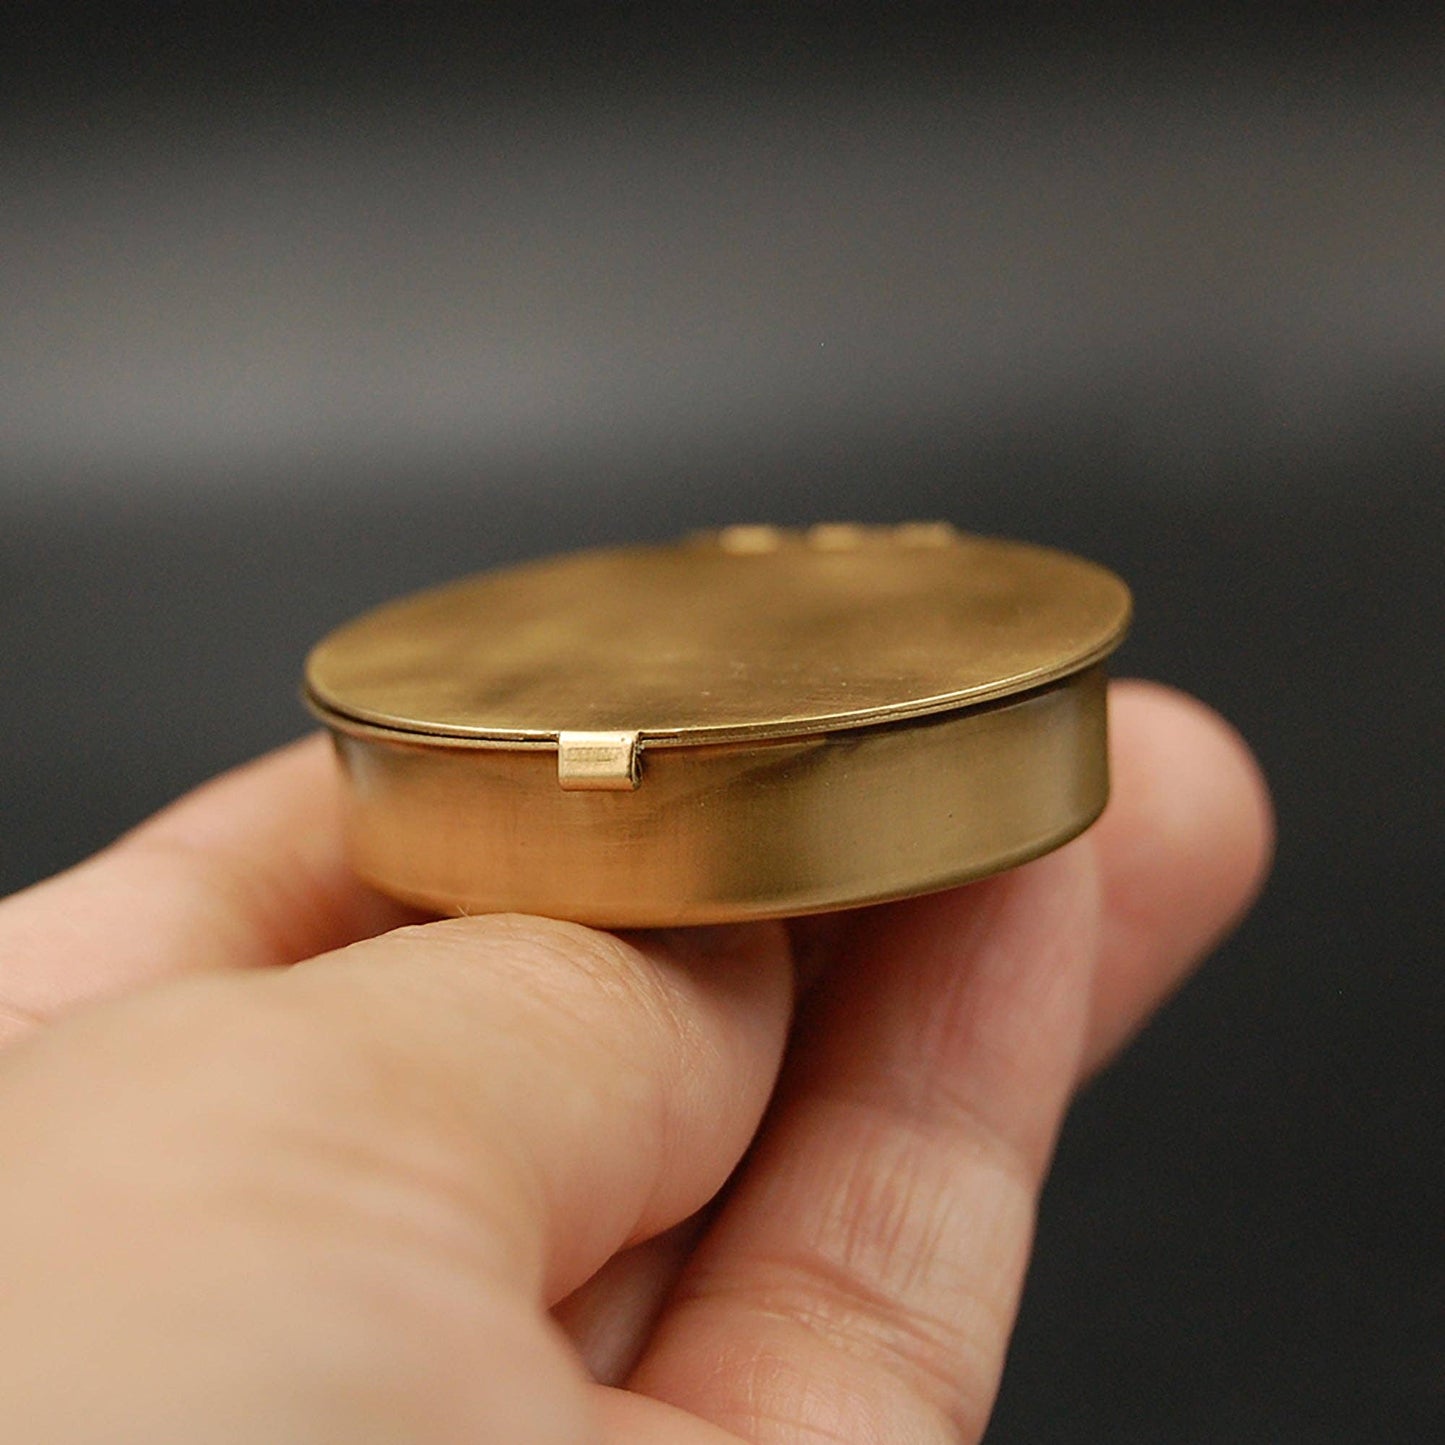 Round Small Brass Pill Box with Your Choice of Engraving: With engraving